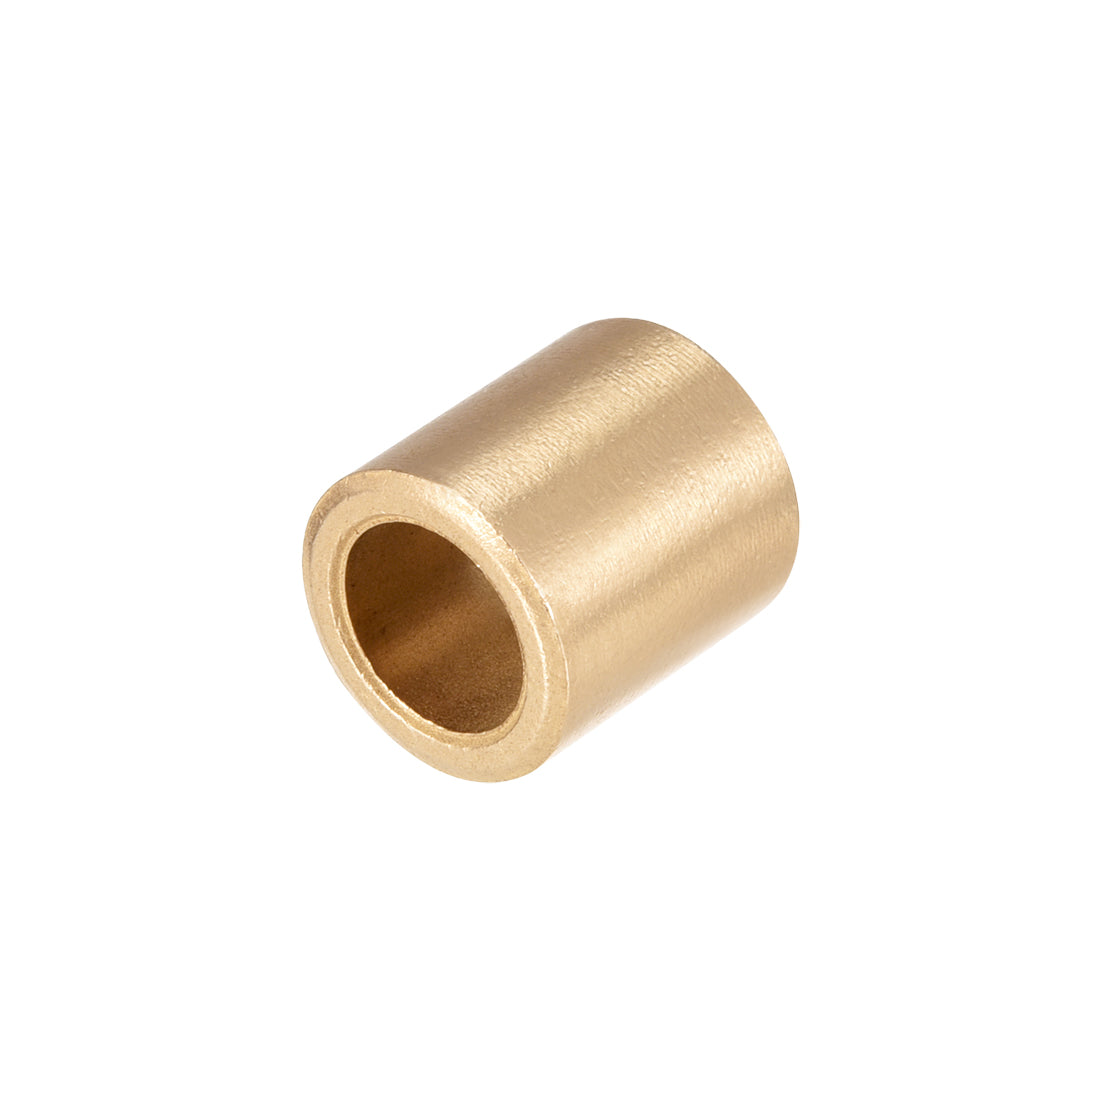 uxcell Uxcell Bearing Sleeve Bore Self-Lubricating Sintered Bronze Bushings